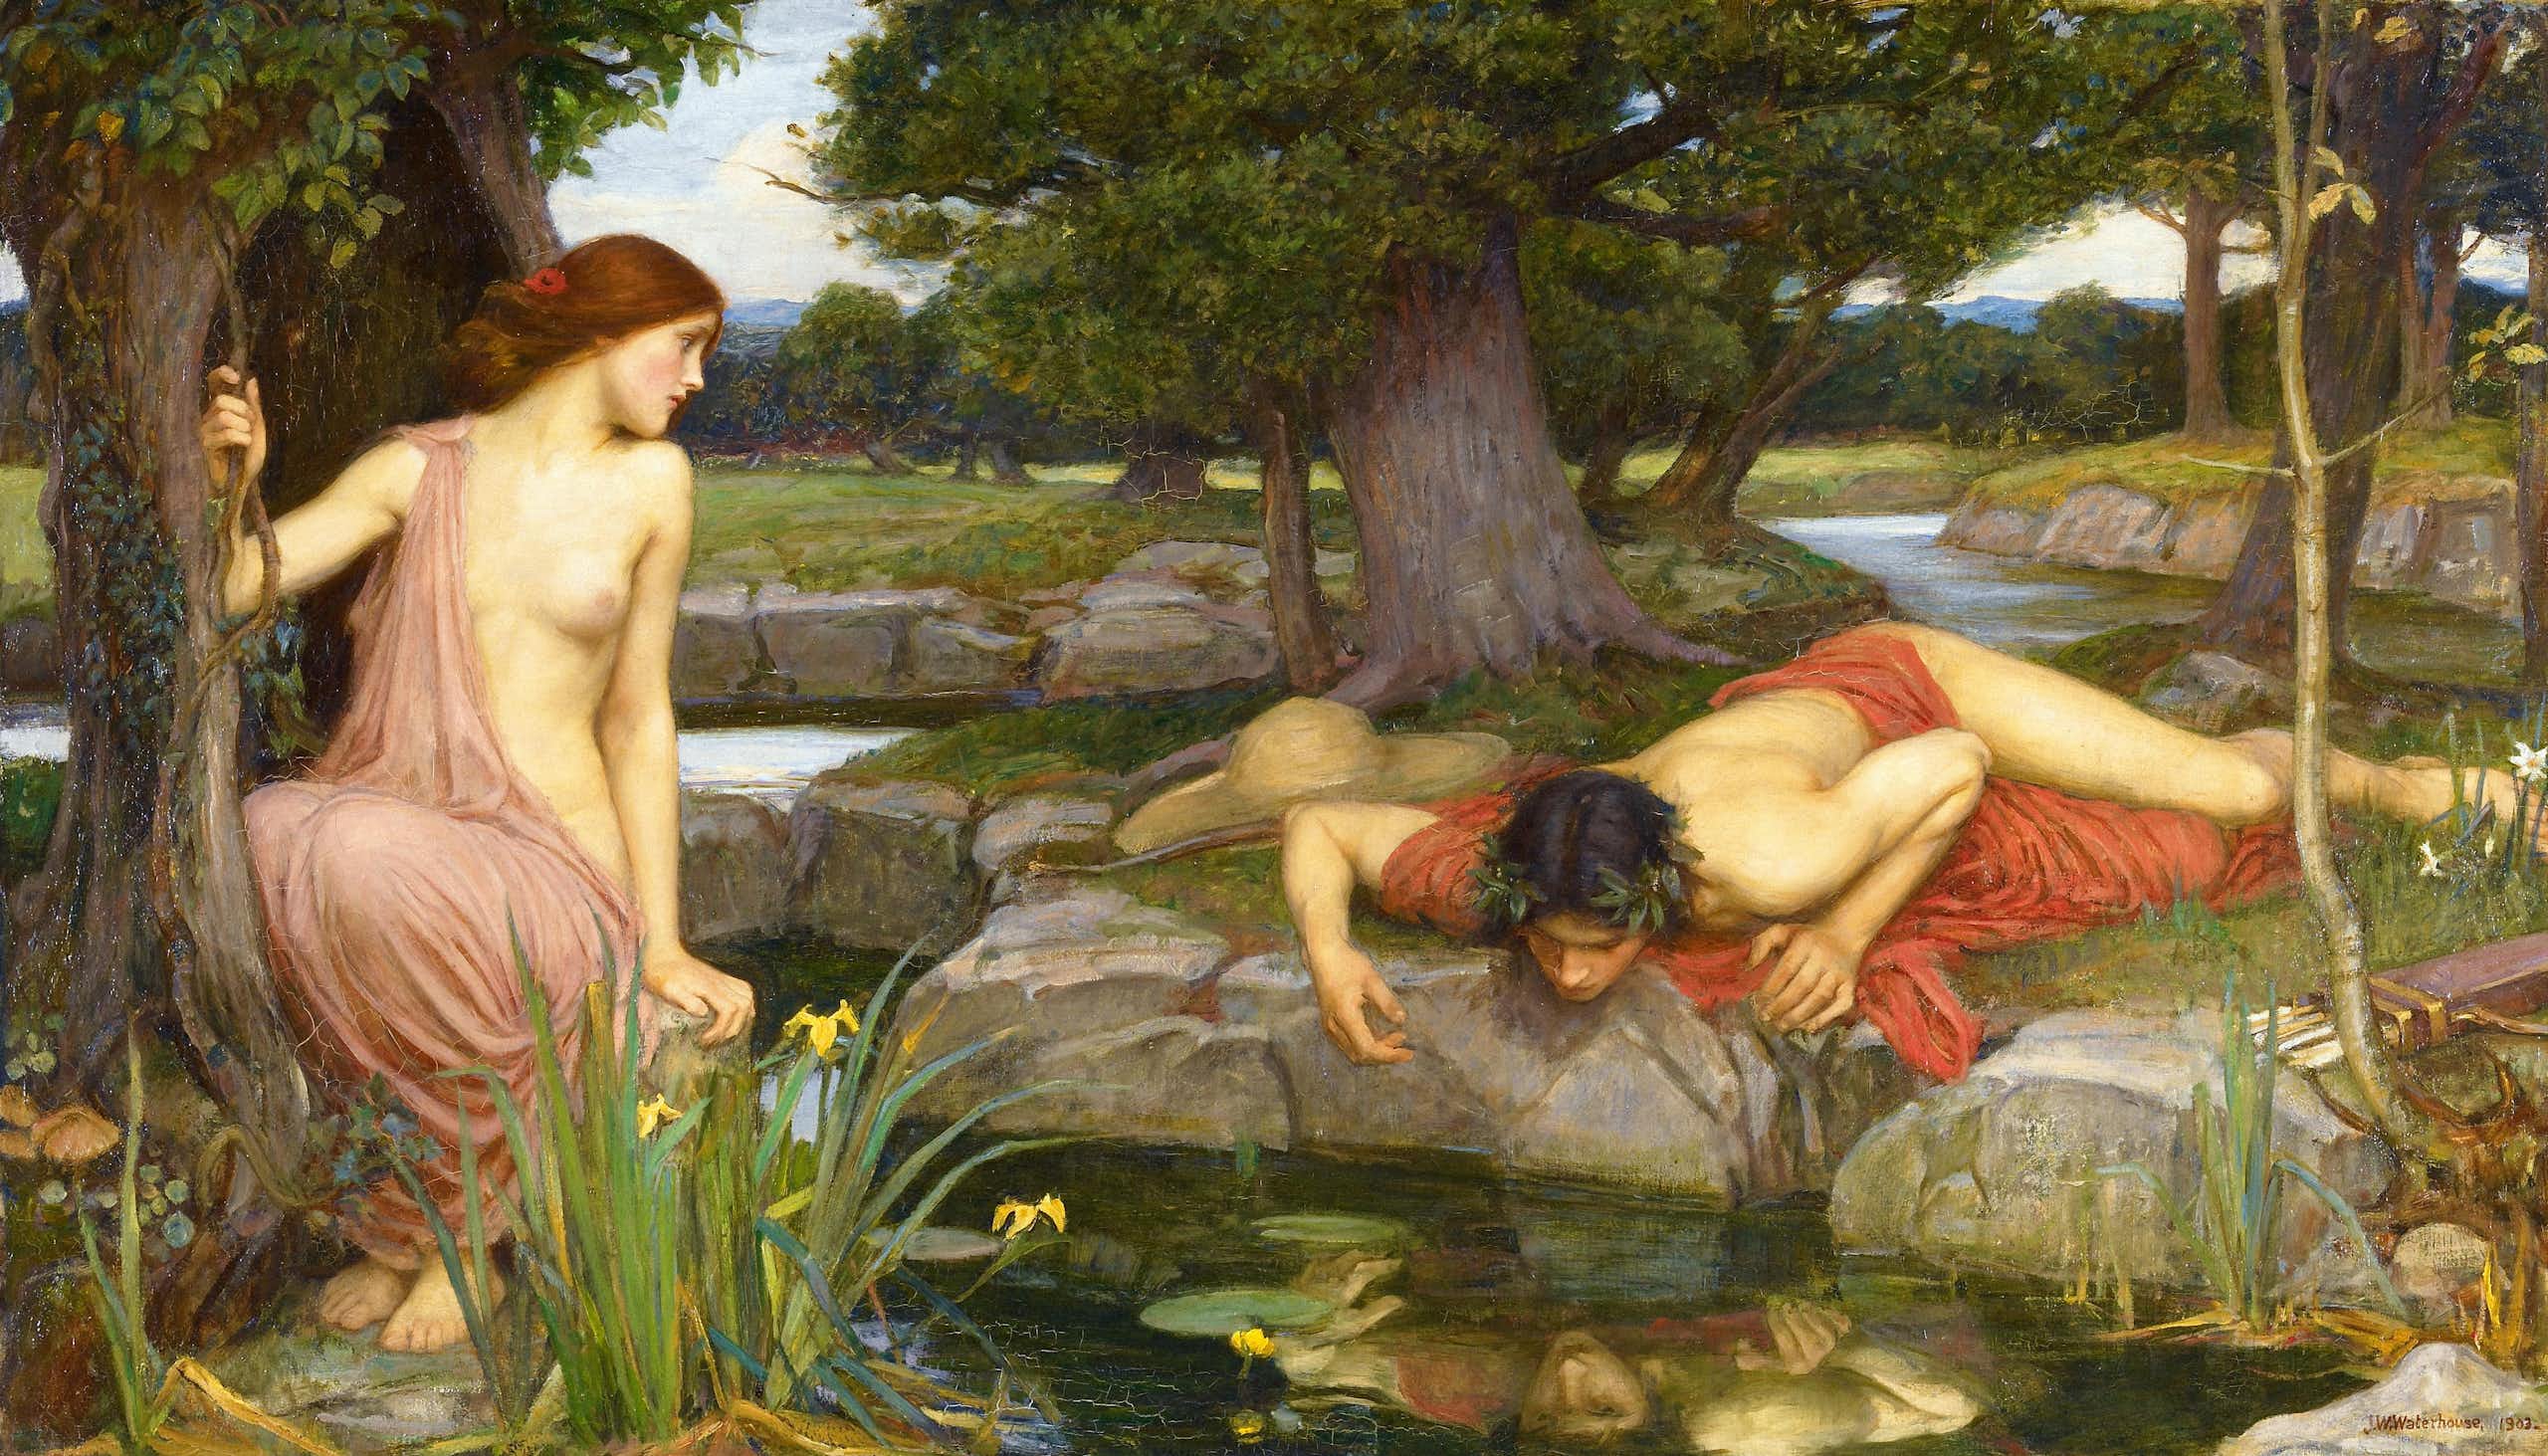 A painting of the Greek myth of Echo and Narcissus